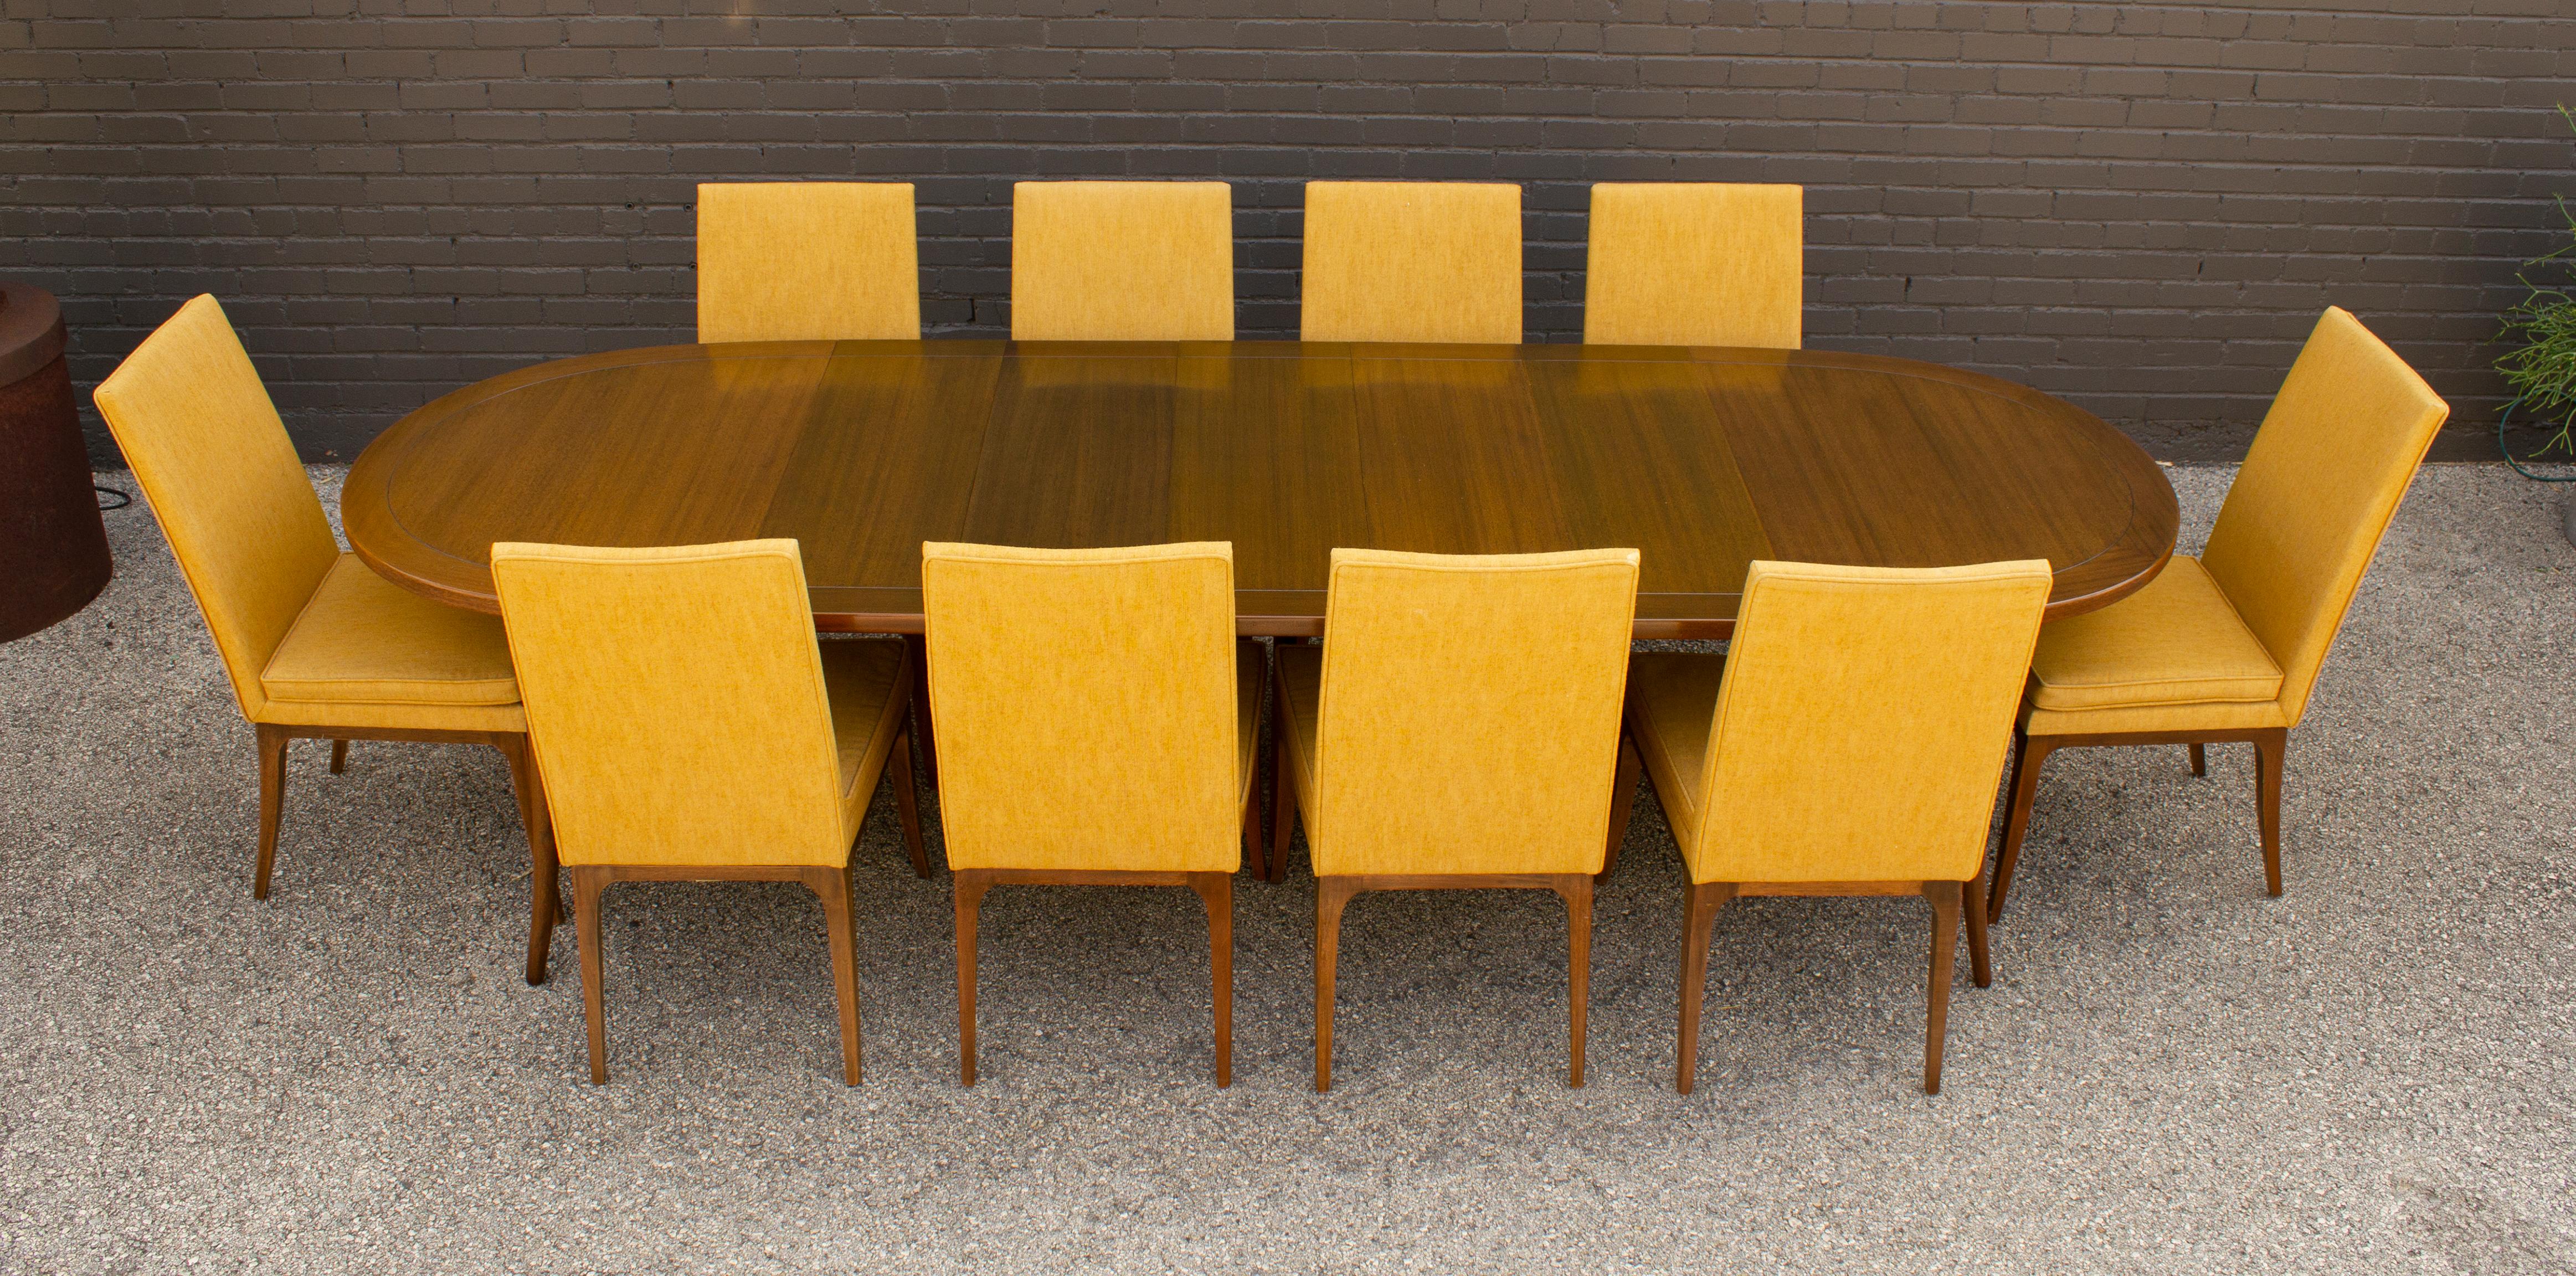 Stunning 10 foot long dining set designed by Harvey Probber. Set consists of an extension dining table with beautiful sabre legs and 5 matching leaves. The table measures 56